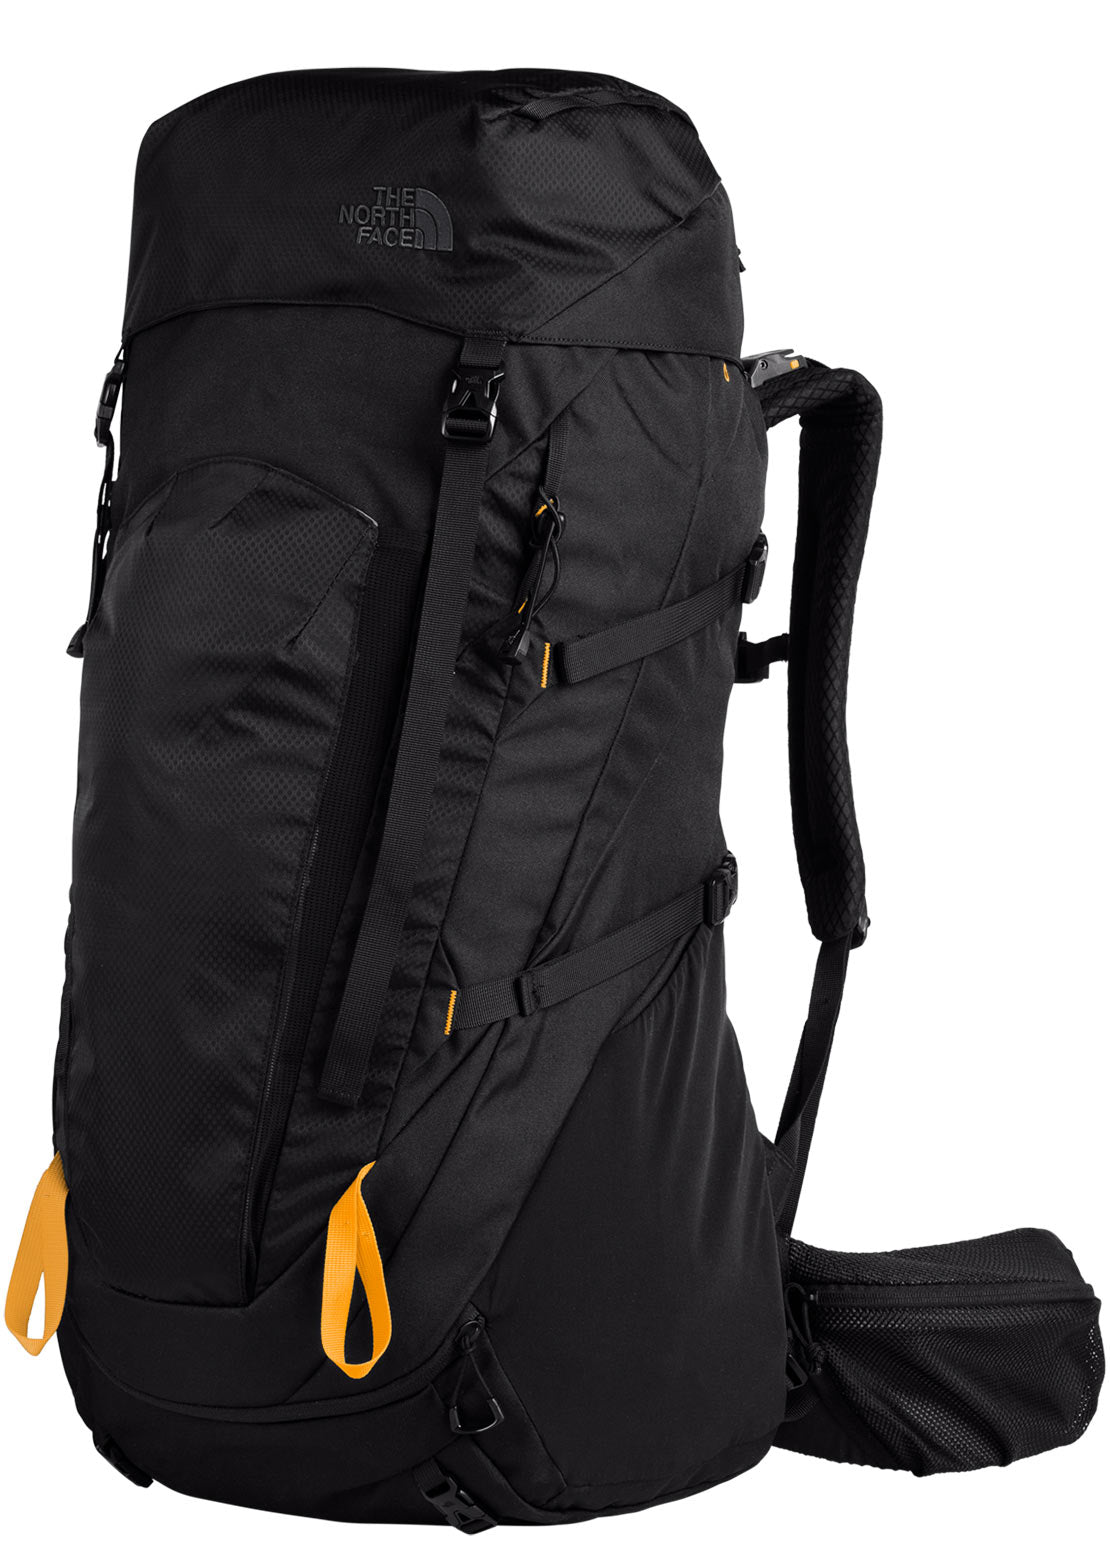 The North Face Terra 65 Hiking BackpackTNF Black/TNF Black